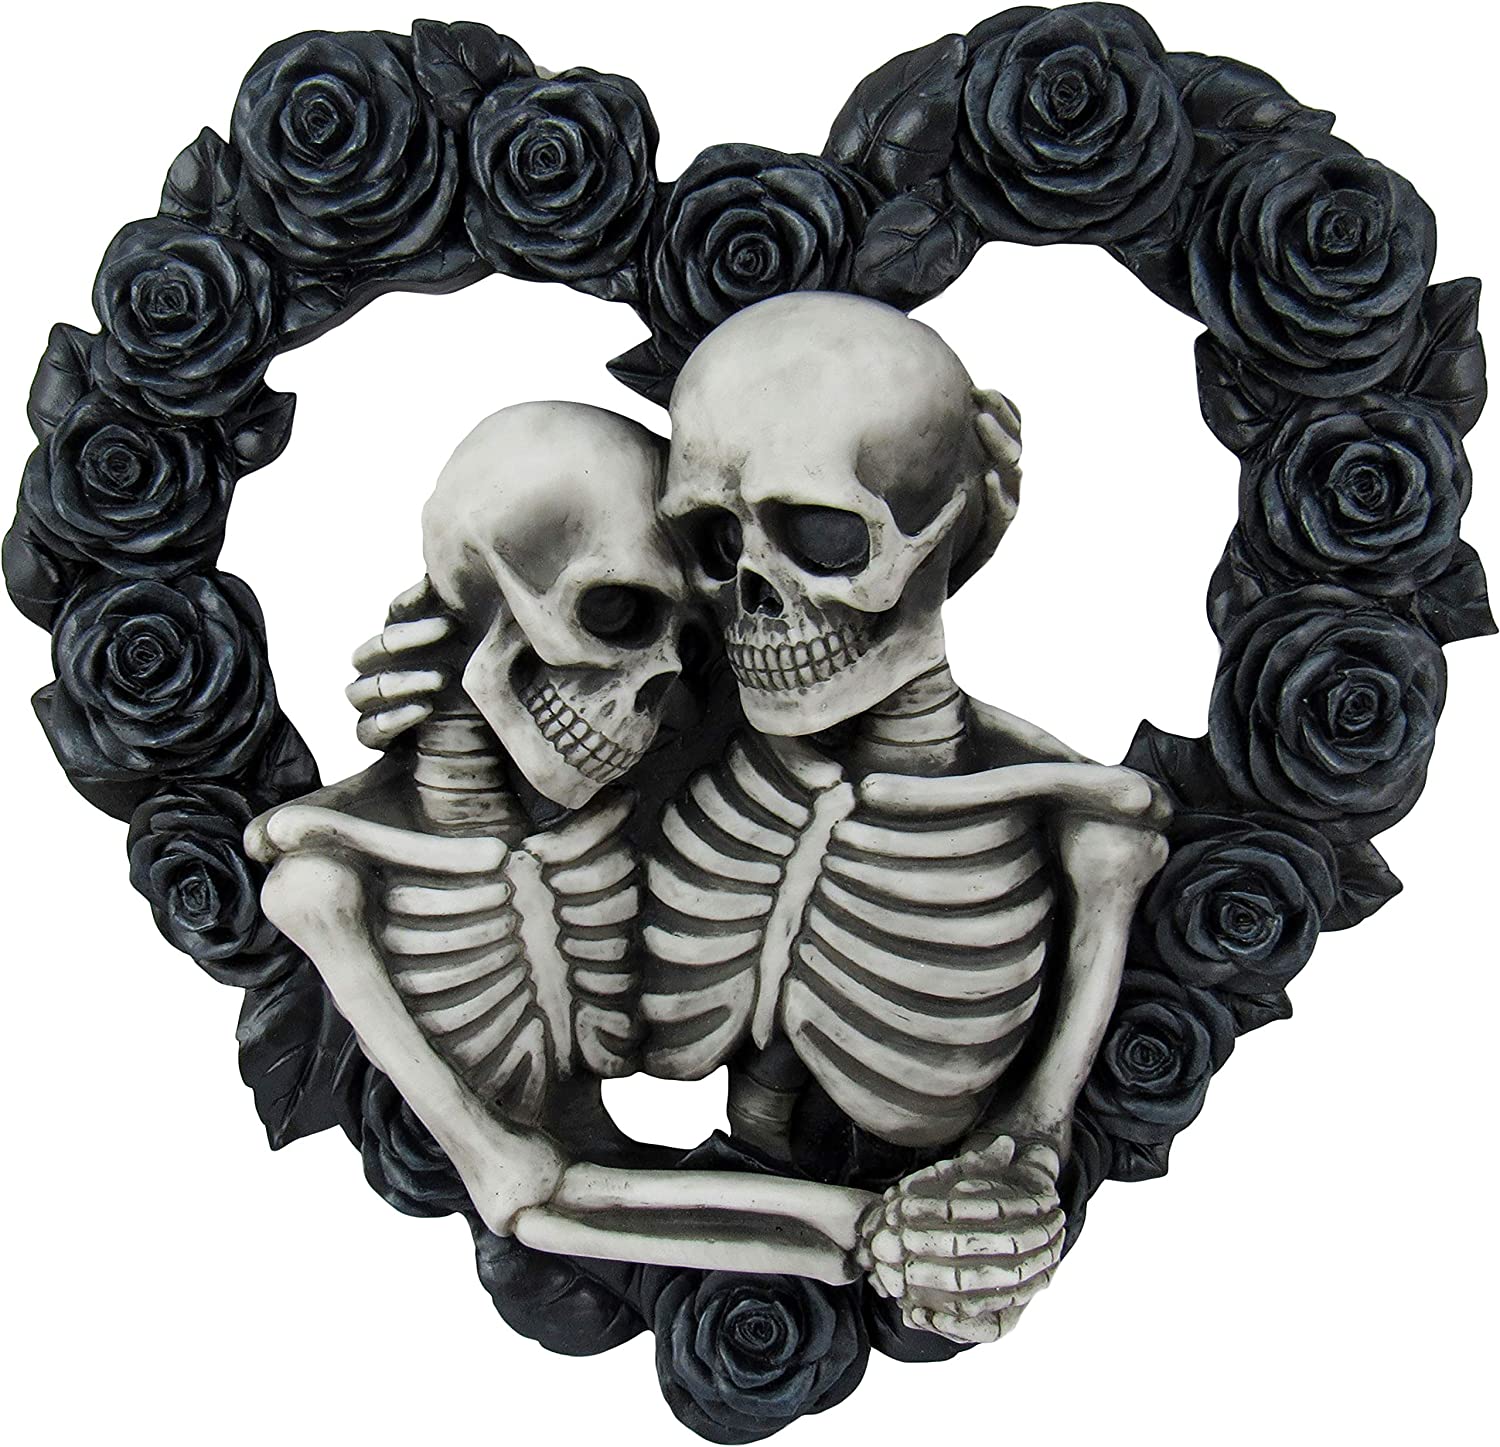 DWK Love is Eternal Gothic Skeleton Lovers Embracing on Black Rose Wreath Wall Sculpture Romantic Goth Valentine's Day Gift Home Decor Accent Door1, Home & Kitchen